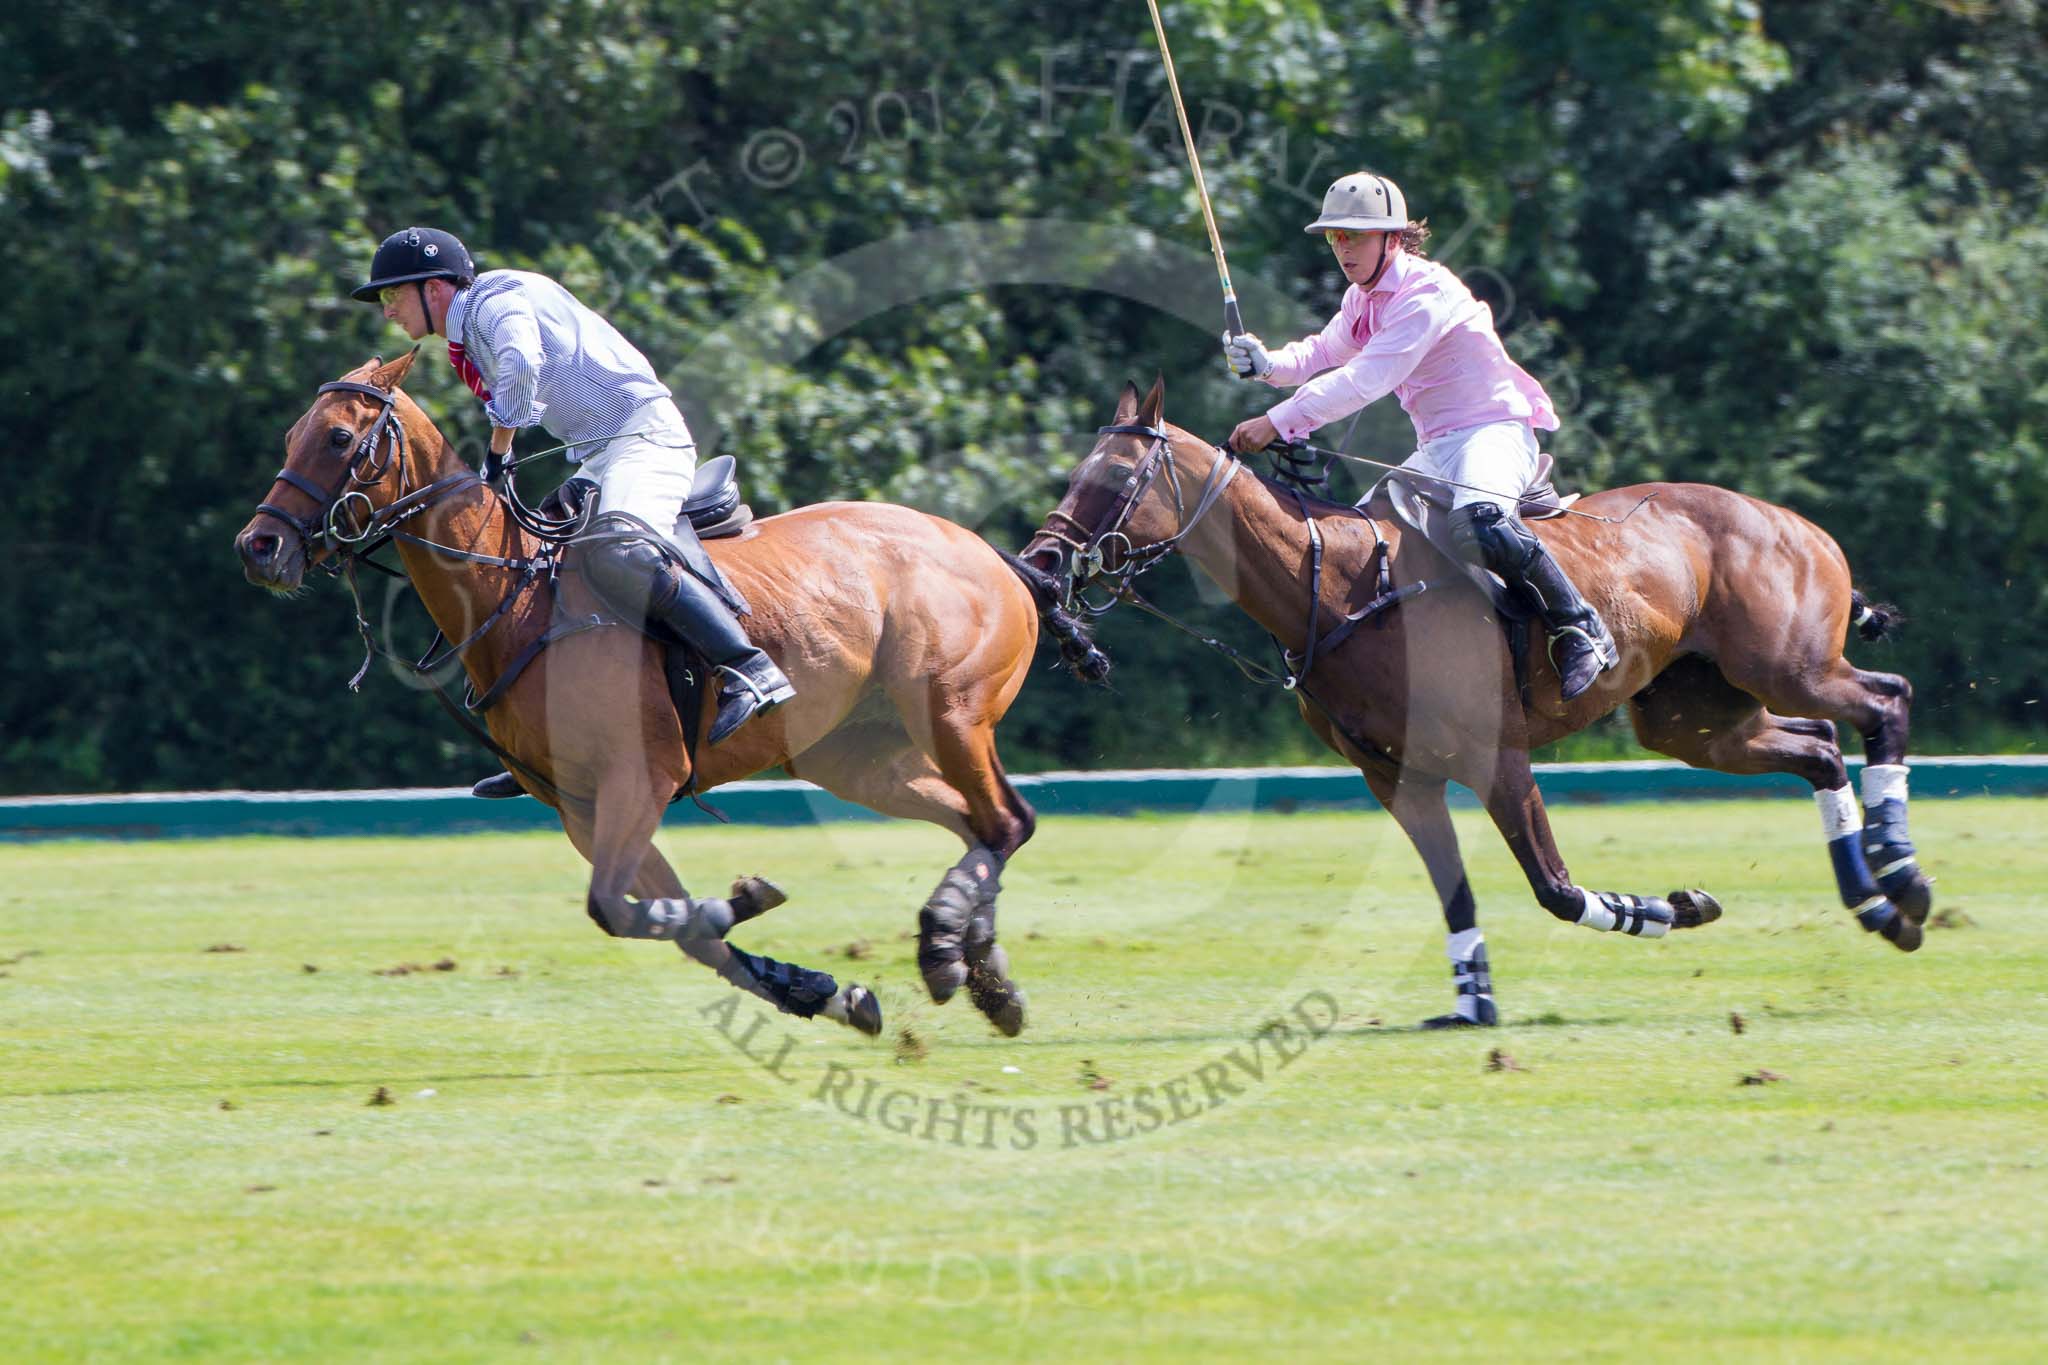 7th Heritage Polo Cup semi-finals: John Martin, Team Silver Fox USA, playing to goal, followed by Nico Talamoni, Team Emerging Switzerland..
Hurtwood Park Polo Club,
Ewhurst Green,
Surrey,
United Kingdom,
on 04 August 2012 at 11:37, image #67